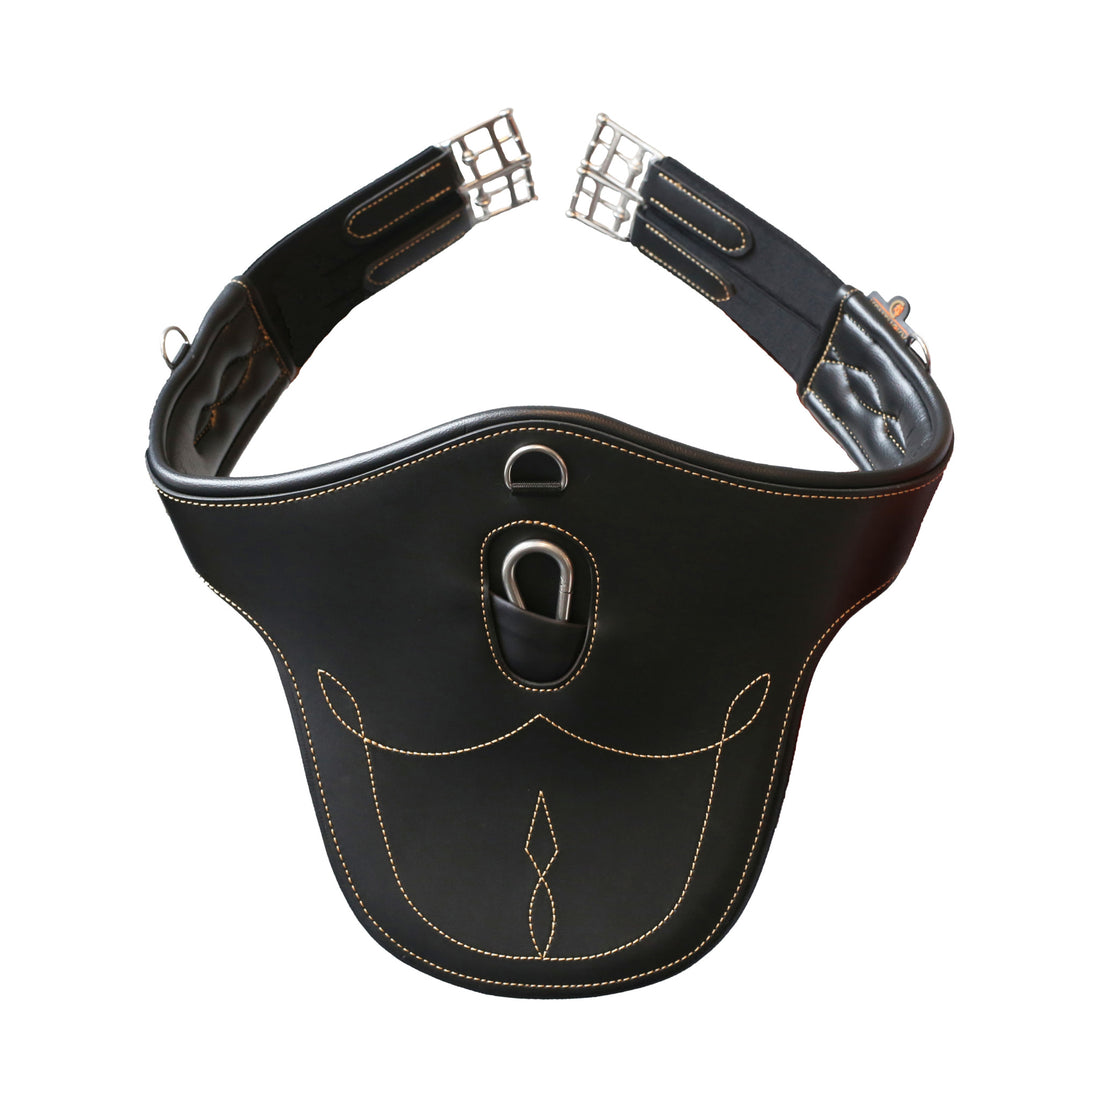 Kentucky stud girth made with artificial leather making it supple and comfortable and very easy to care and maintain. Made in an anatomical shape to mould around your horse and offer them maximum protection. 